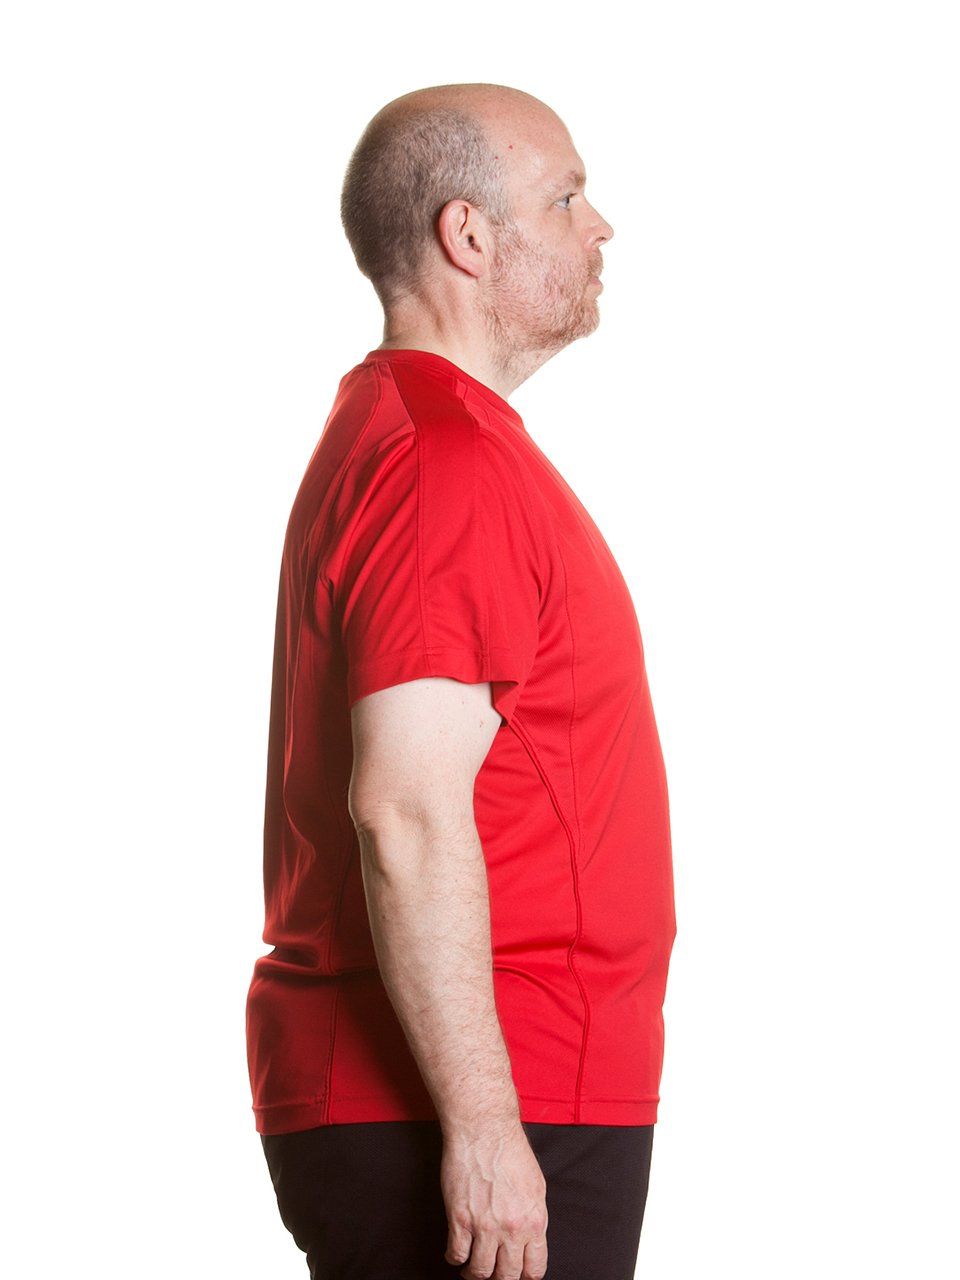 a man in a red shirt is standing in front of a white background